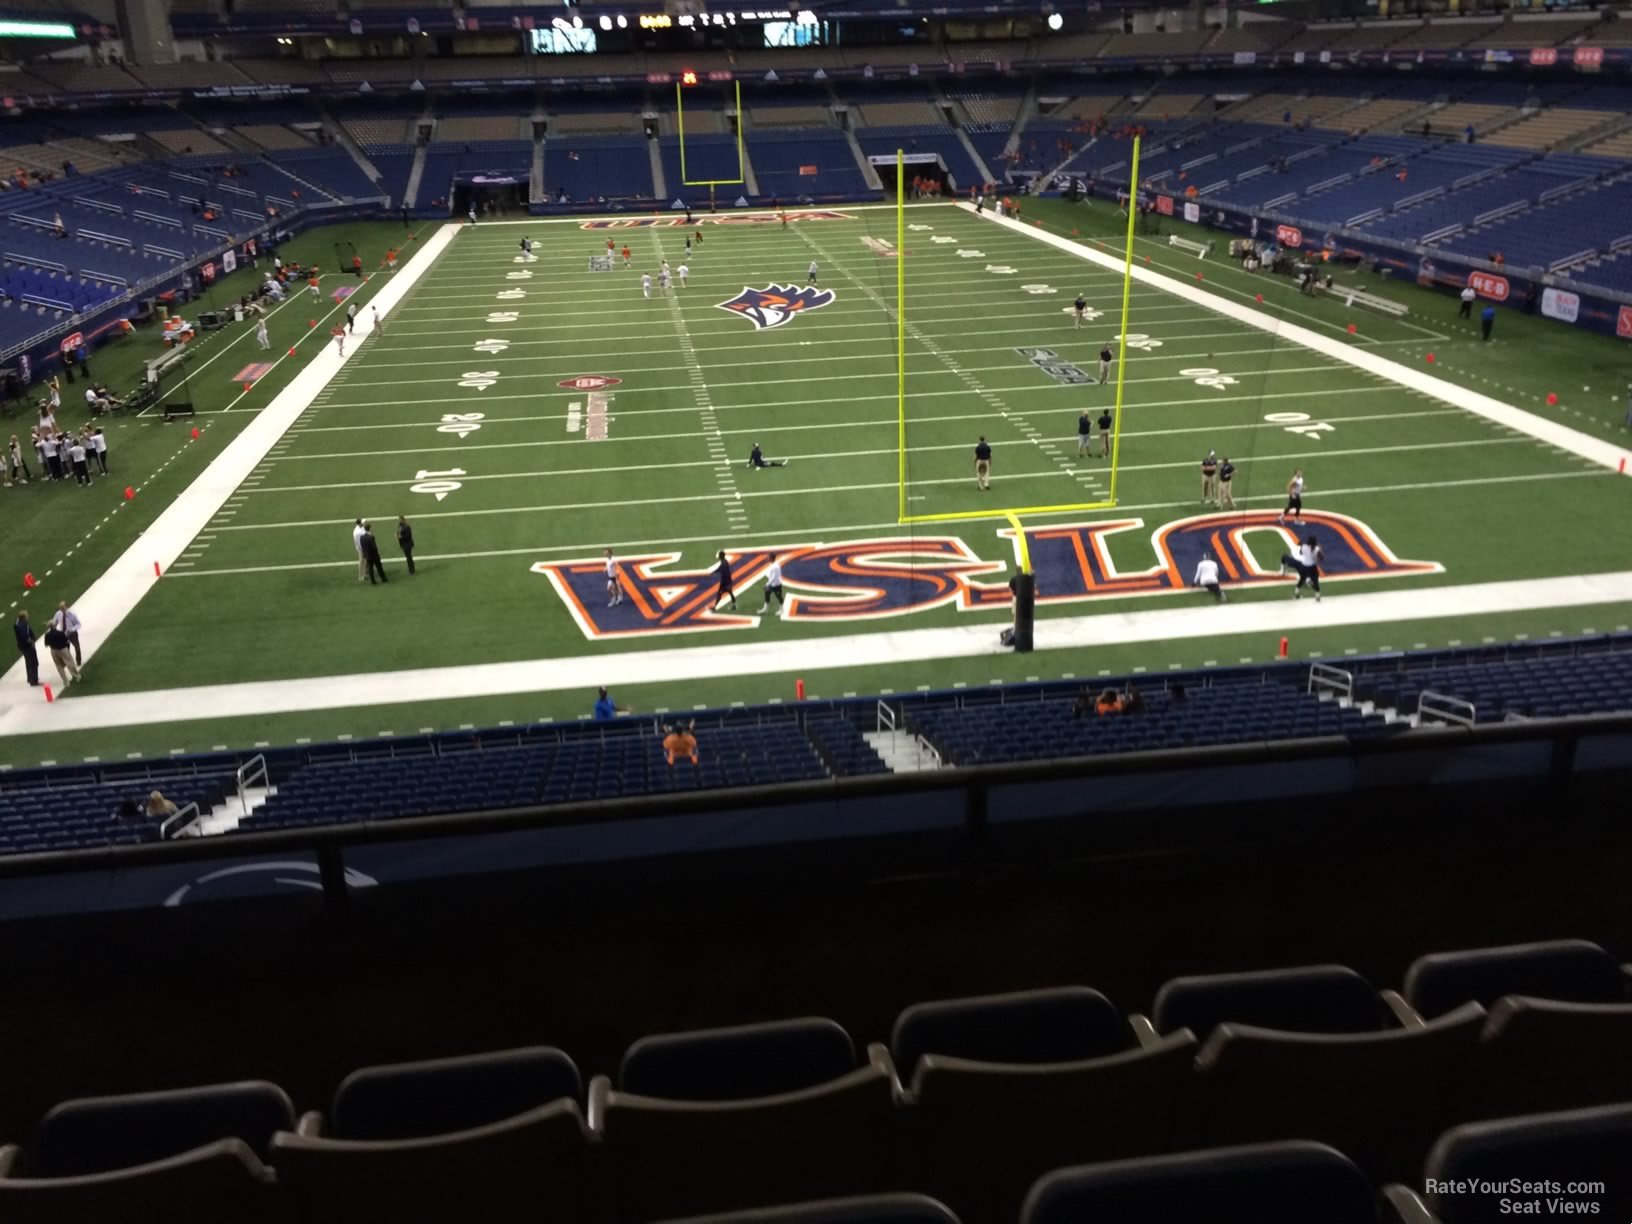 section 202, row 5 seat view  for football - alamodome